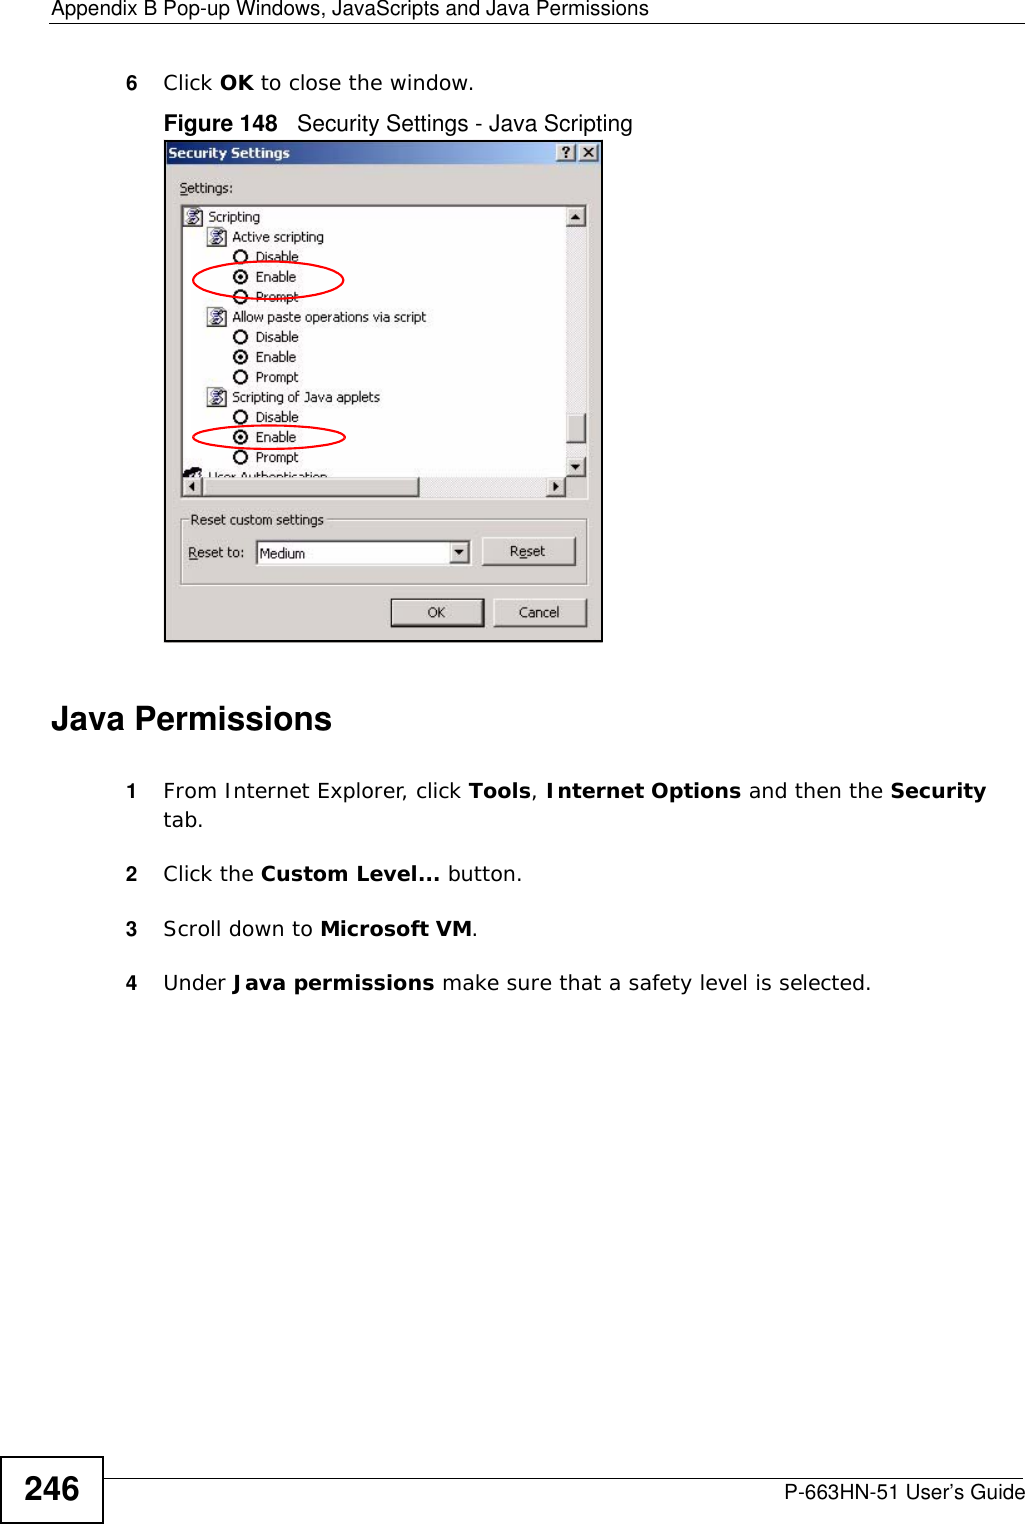 Appendix B Pop-up Windows, JavaScripts and Java PermissionsP-663HN-51 User’s Guide2466Click OK to close the window.Figure 148   Security Settings - Java ScriptingJava Permissions1From Internet Explorer, click Tools, Internet Options and then the Security tab. 2Click the Custom Level... button. 3Scroll down to Microsoft VM. 4Under Java permissions make sure that a safety level is selected.